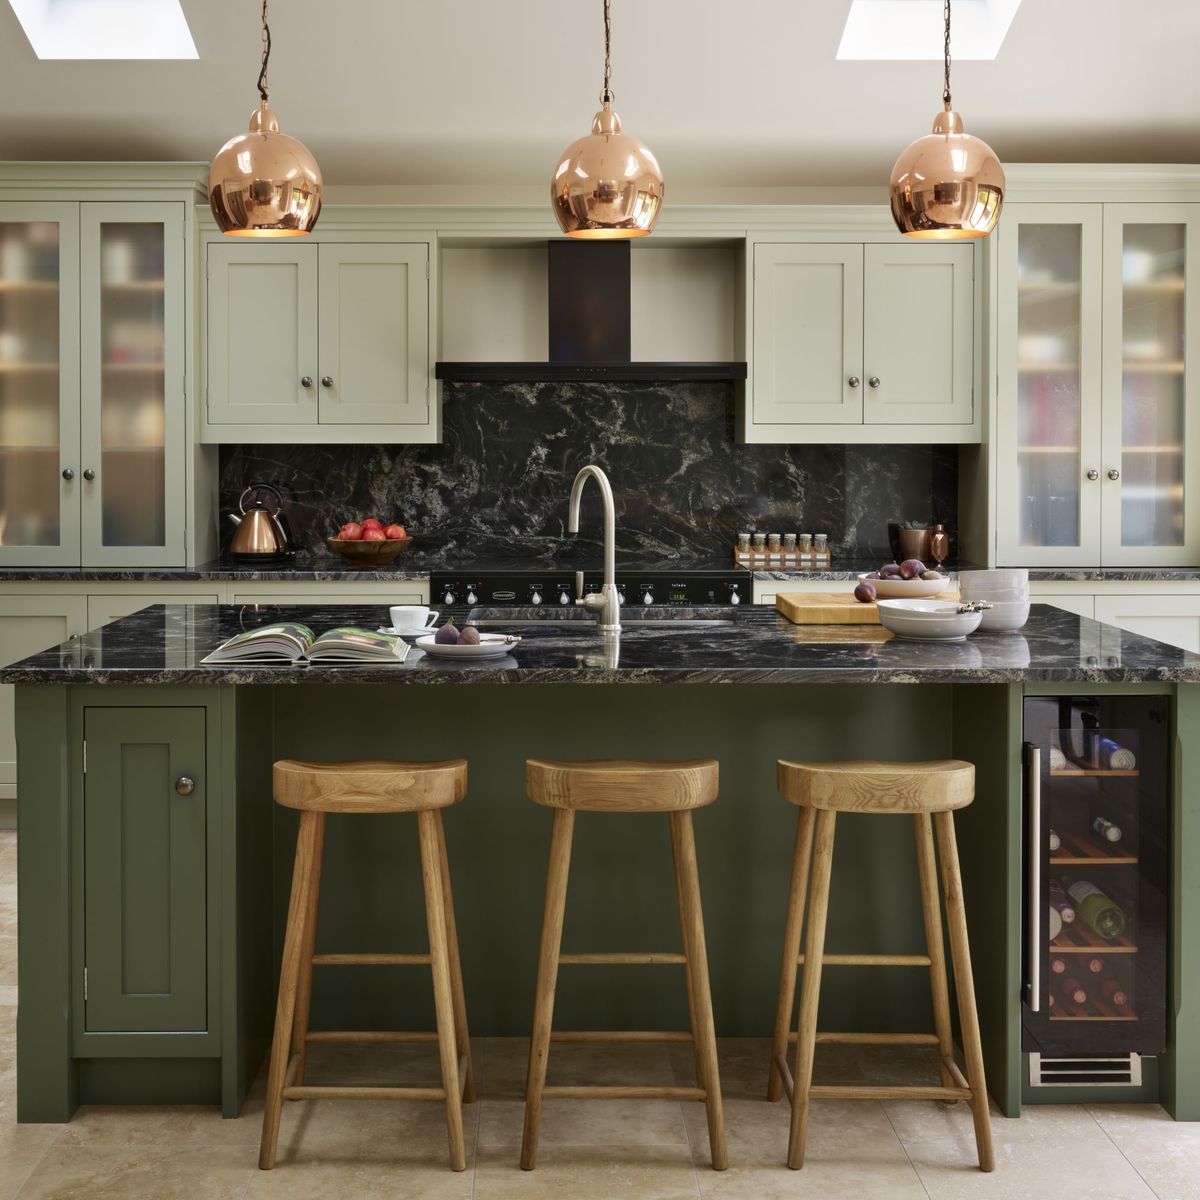 Green Kitchen Ideas: 16 Kitchens In Sage, Olive And Apple